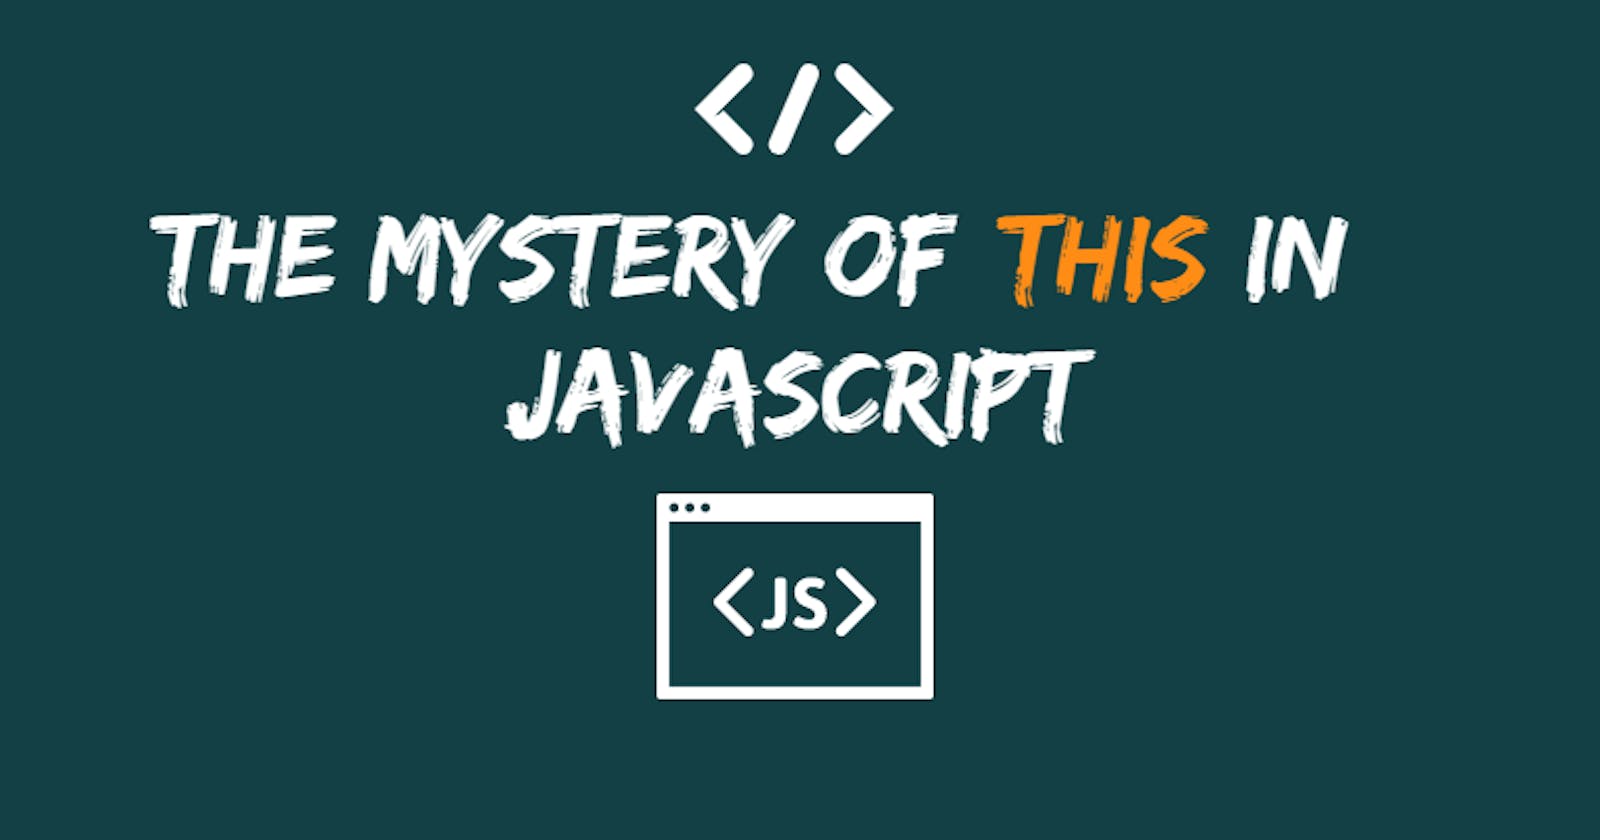 The mystery of “this” in JavaScript.